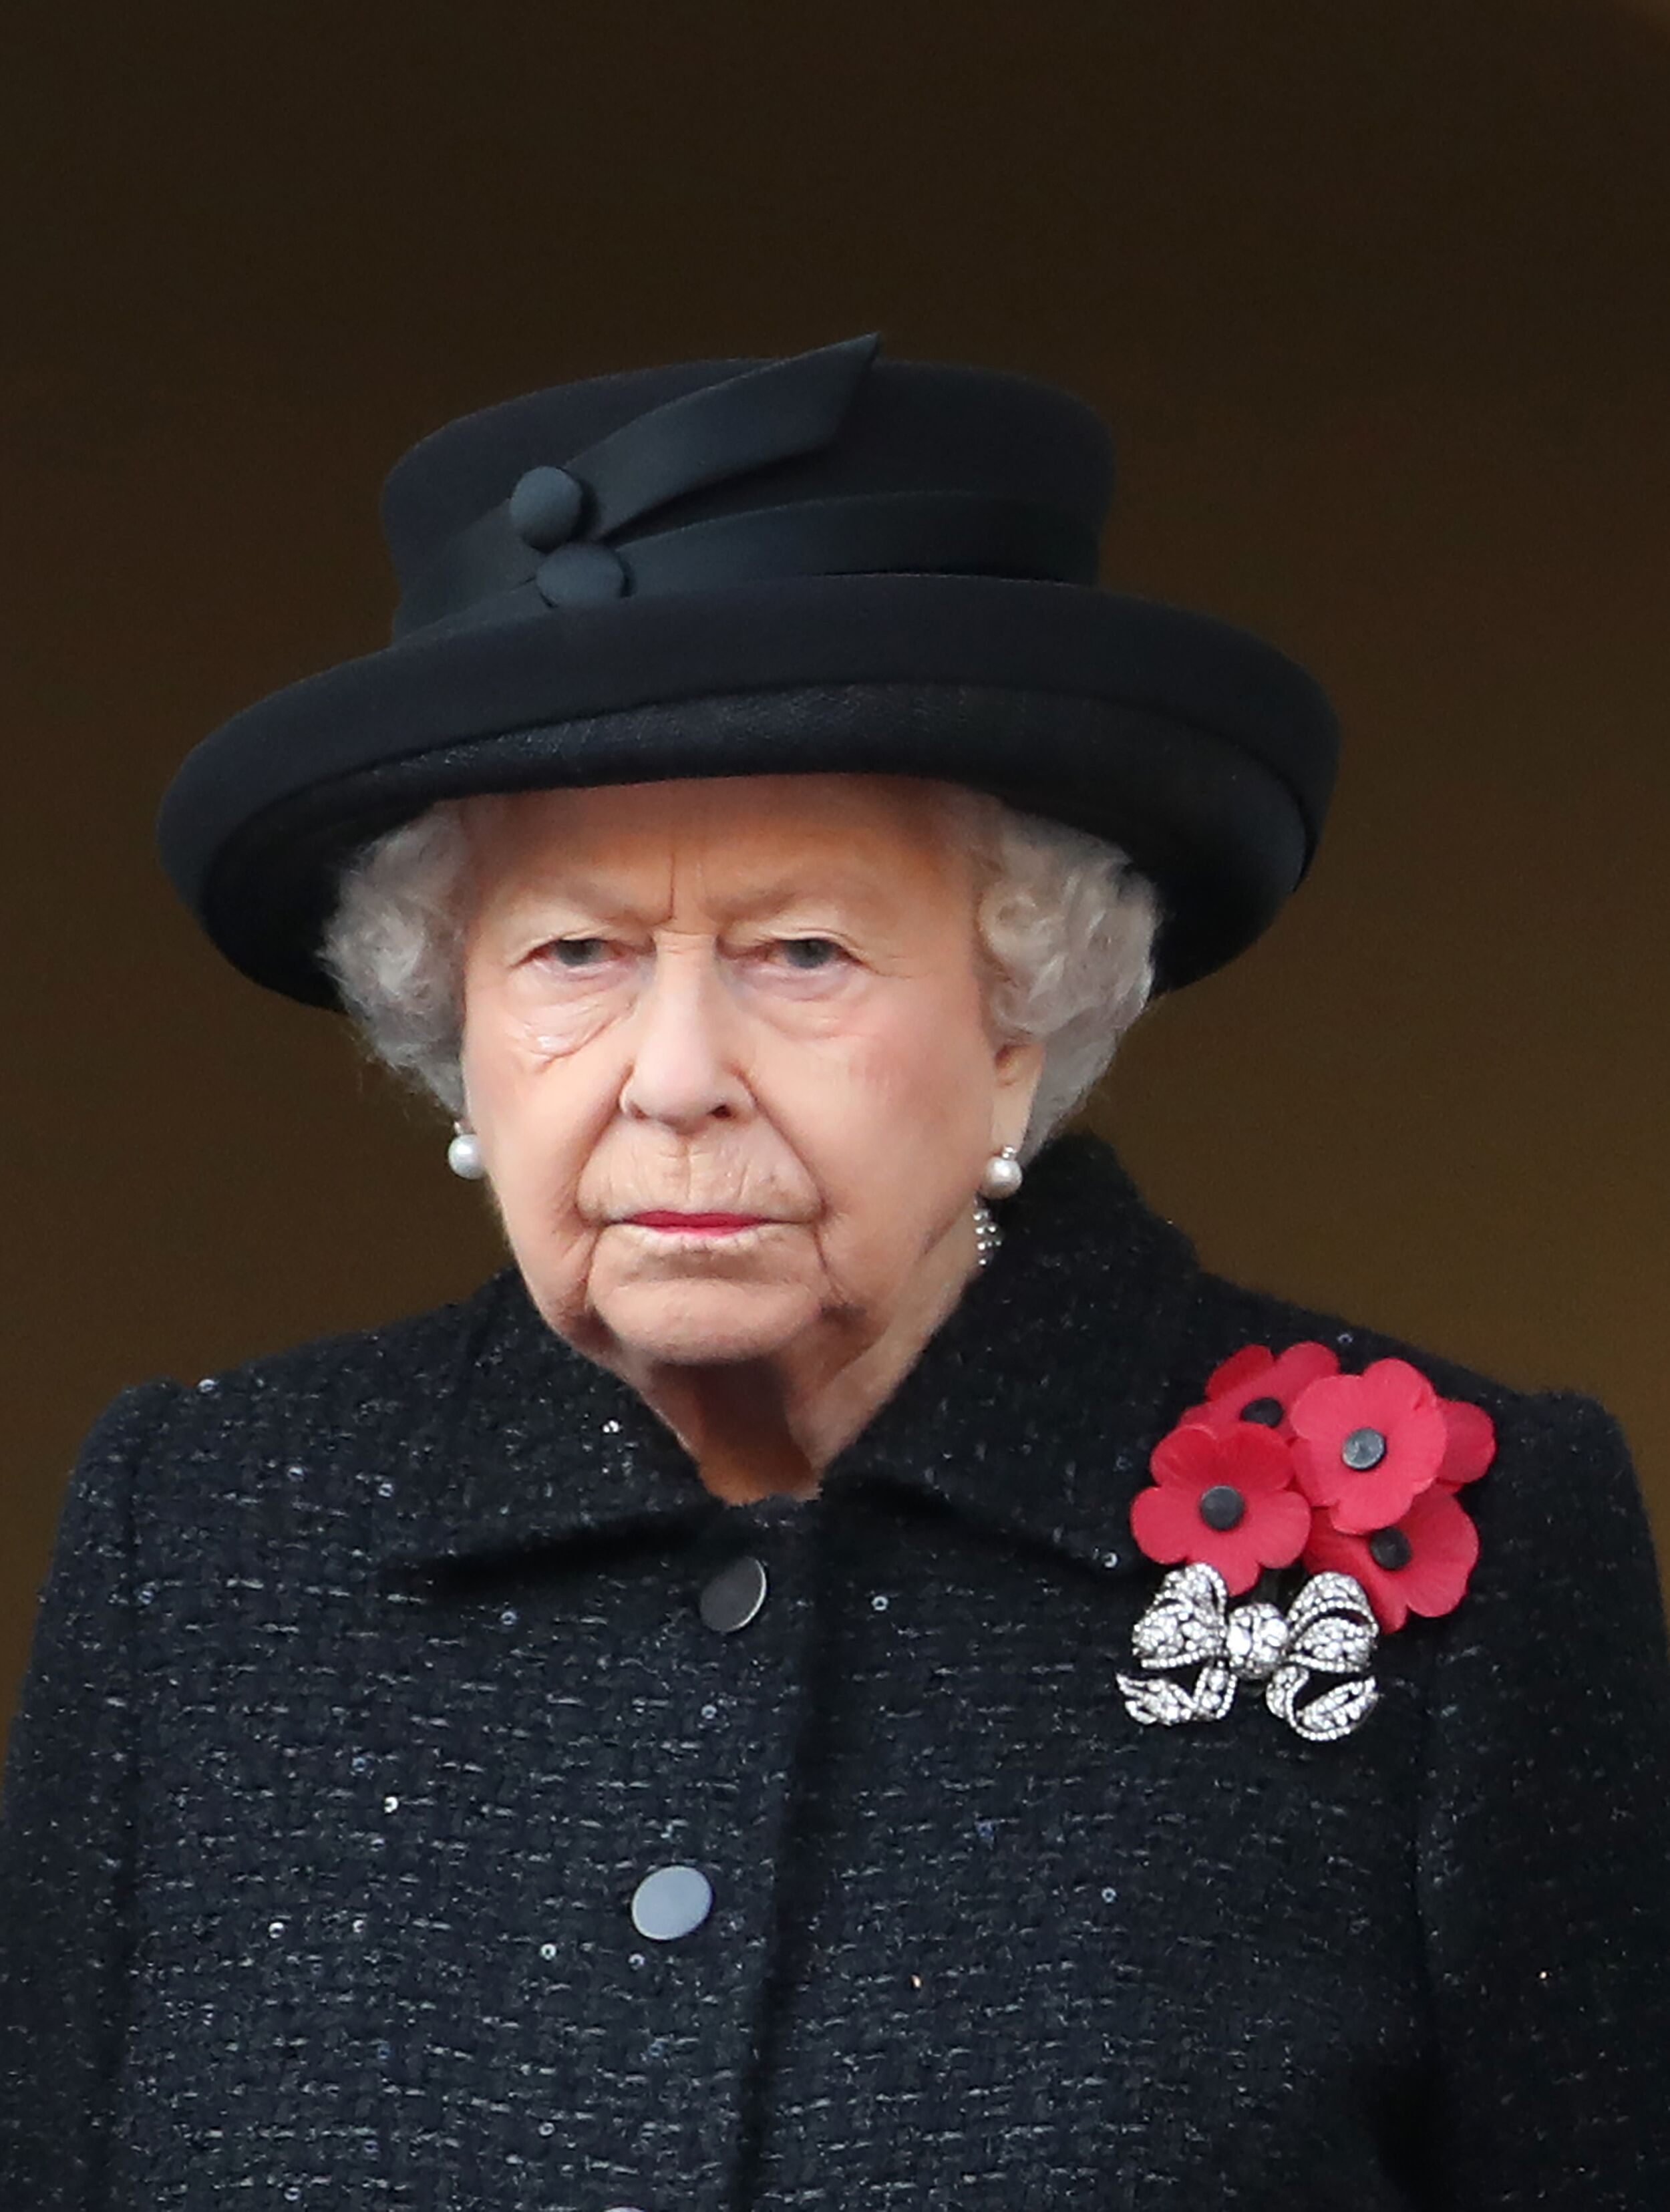 Queen Elizabeth II at the annual Remembrance Sunday memorial at The Cenotaph on November 10, 2019, in London, England | Photo: Chris Jackson/Getty Images